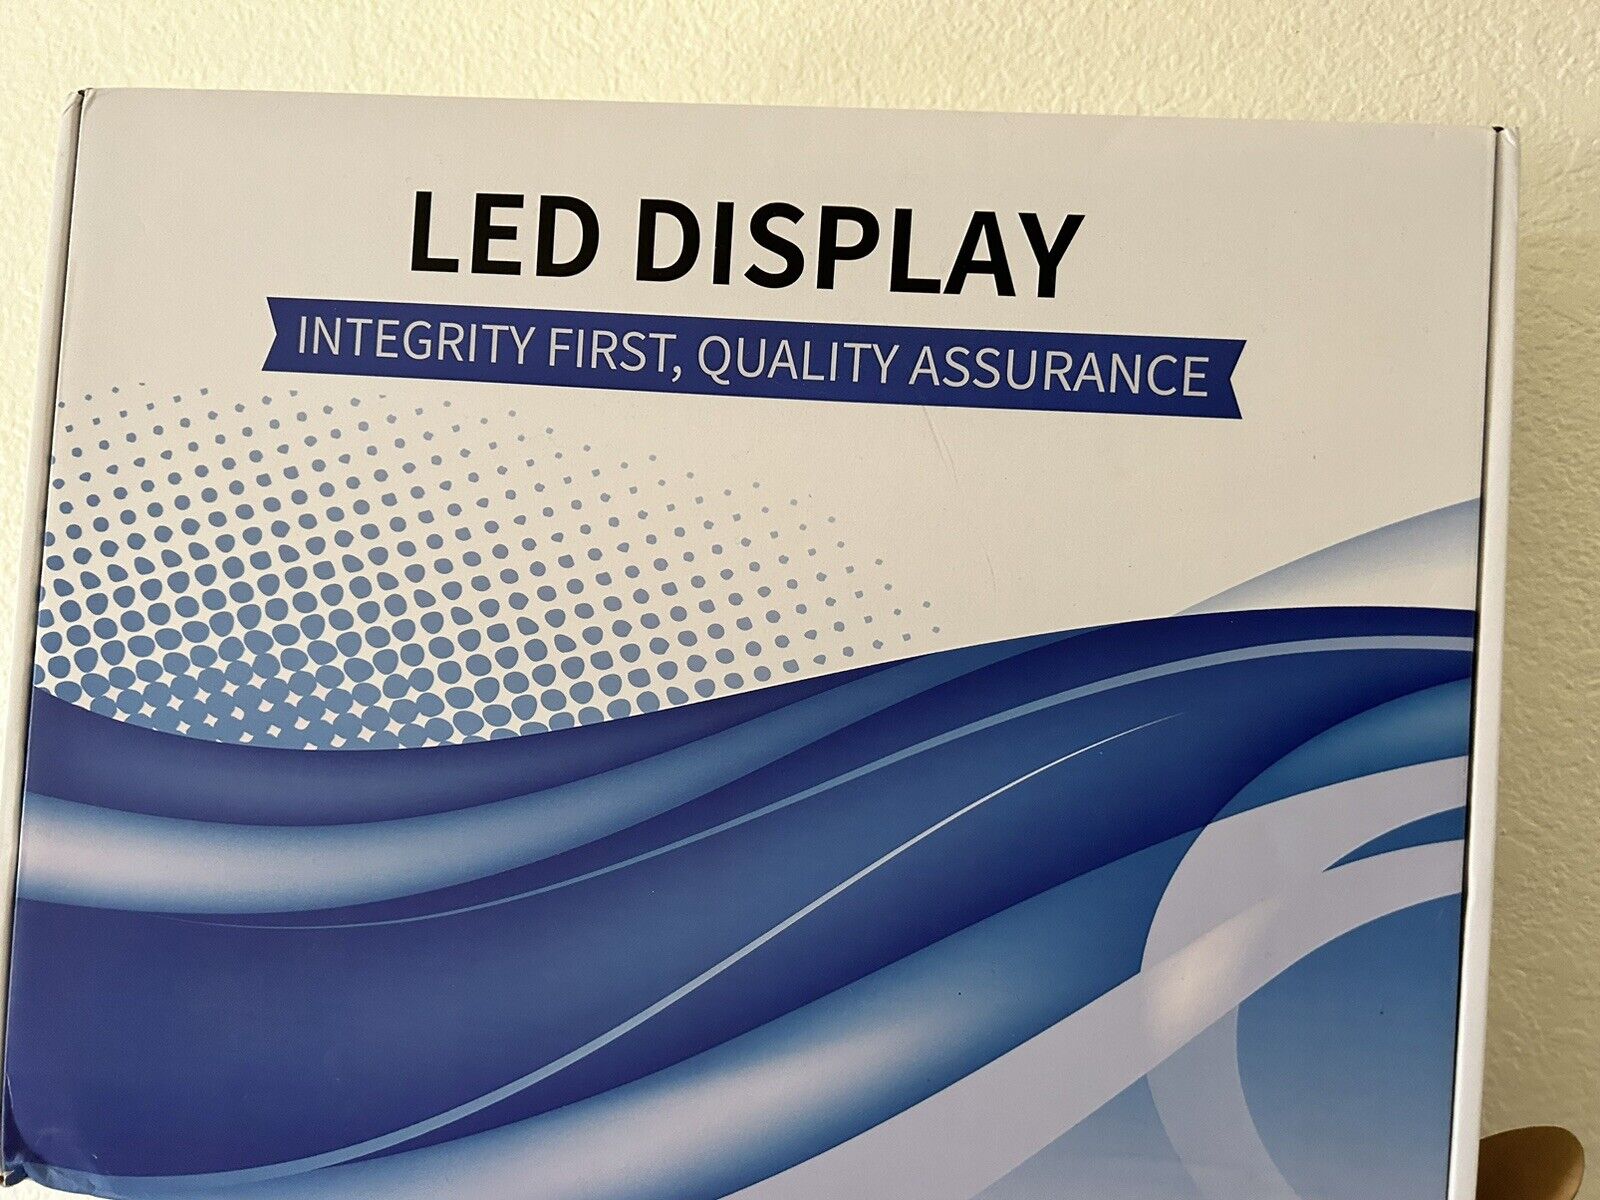 Led display integrity first quality assurance 14-inch portable monitor 